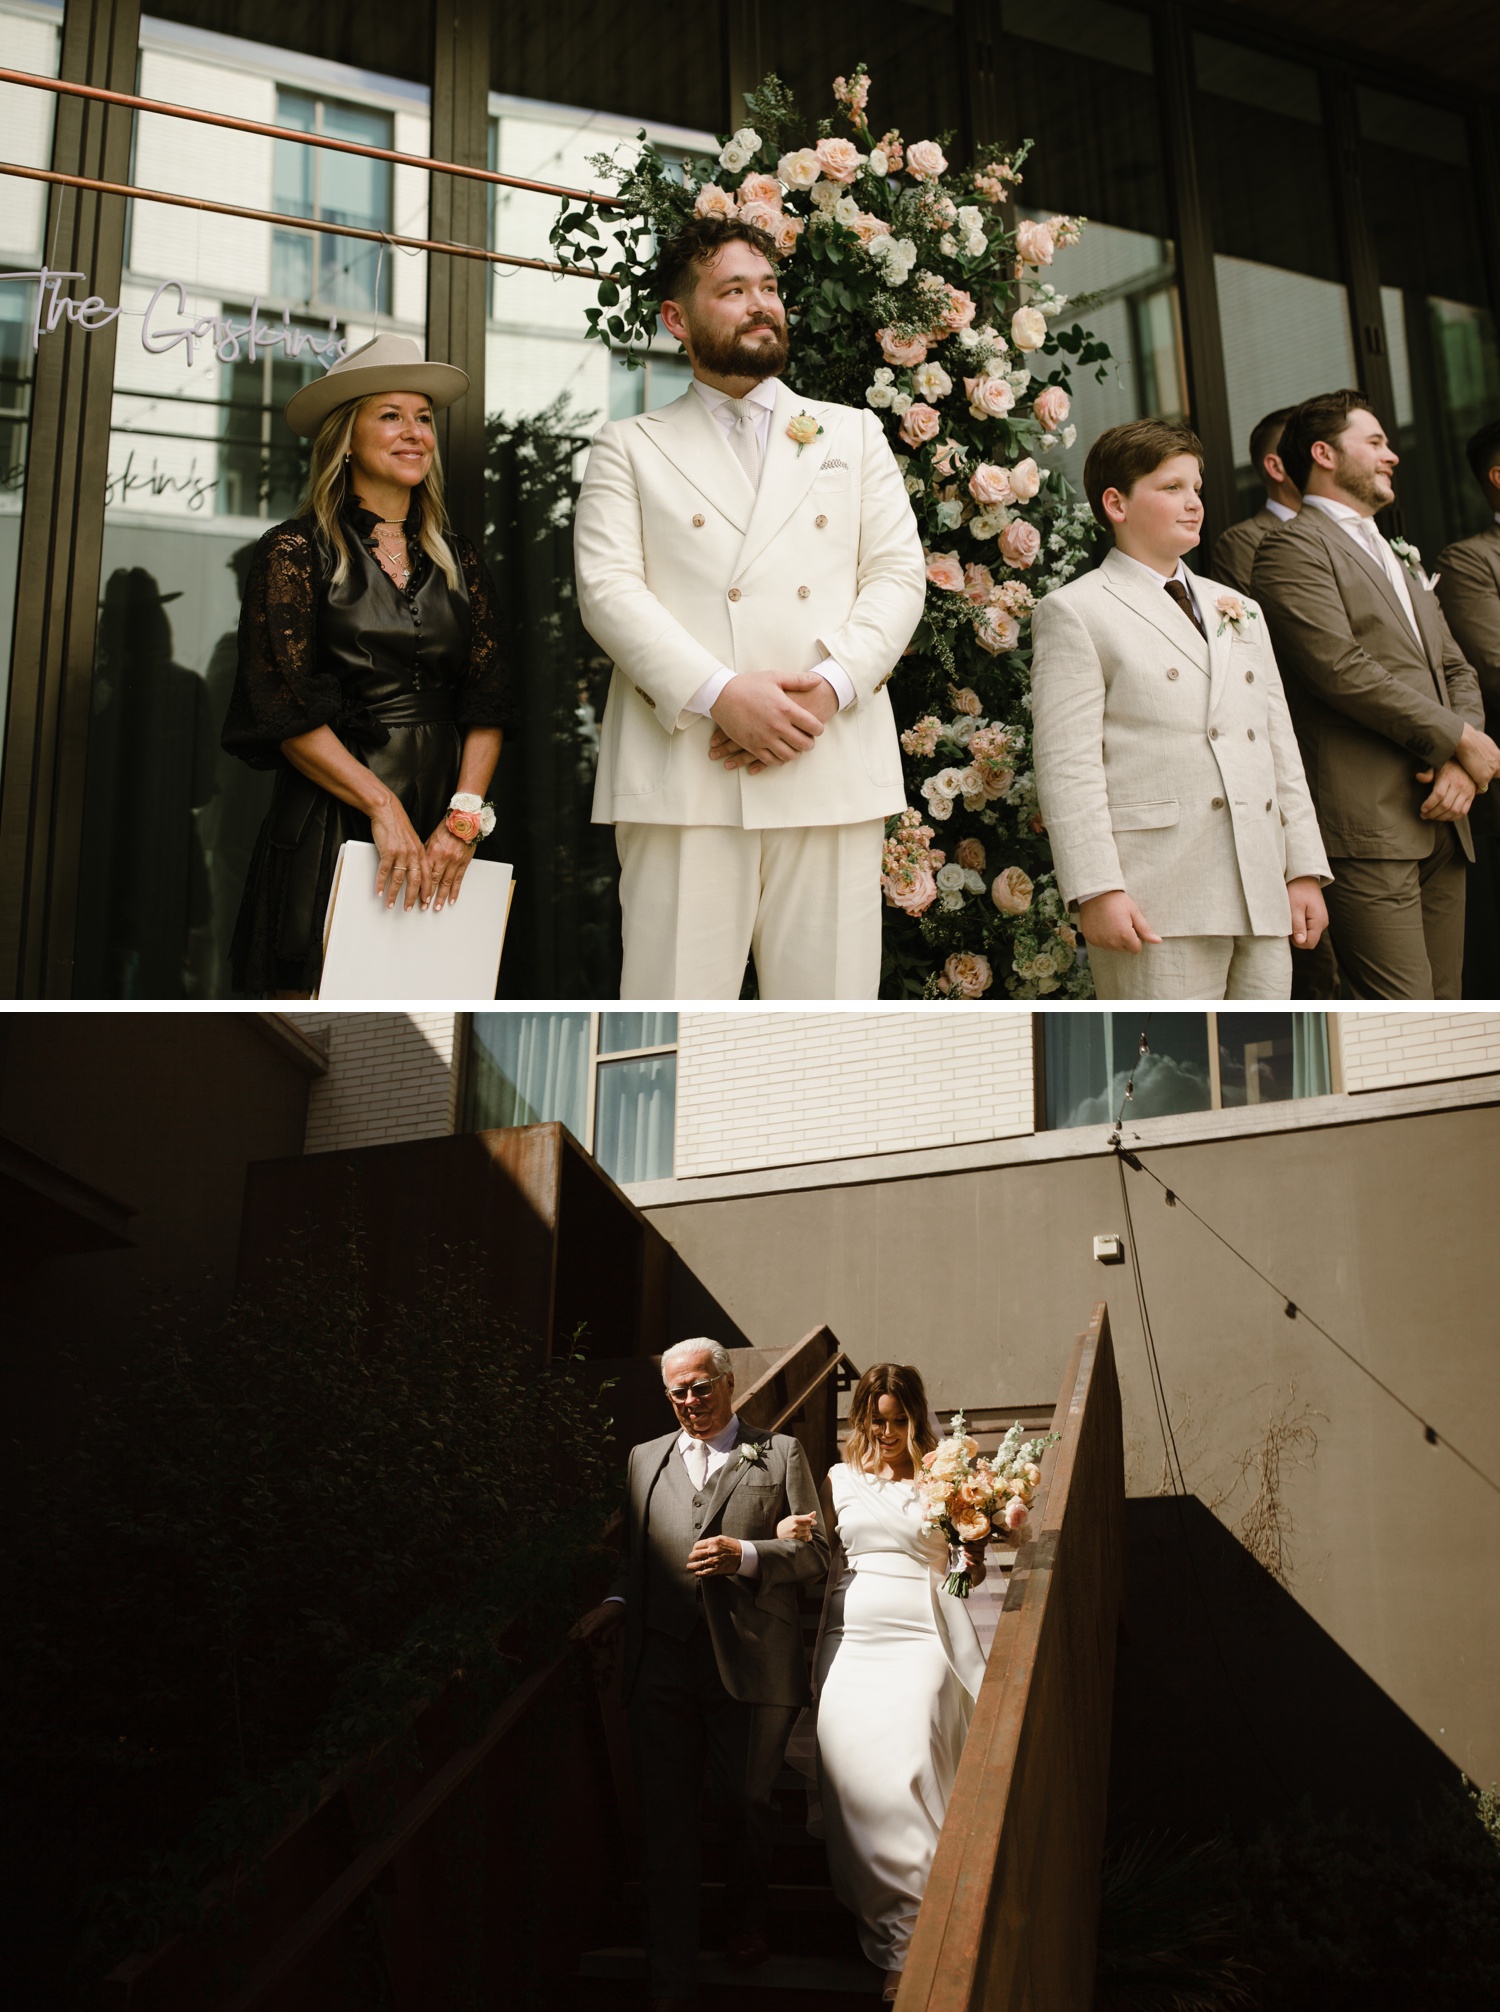 Outdoor wedding ceremony at South Congress Hotel